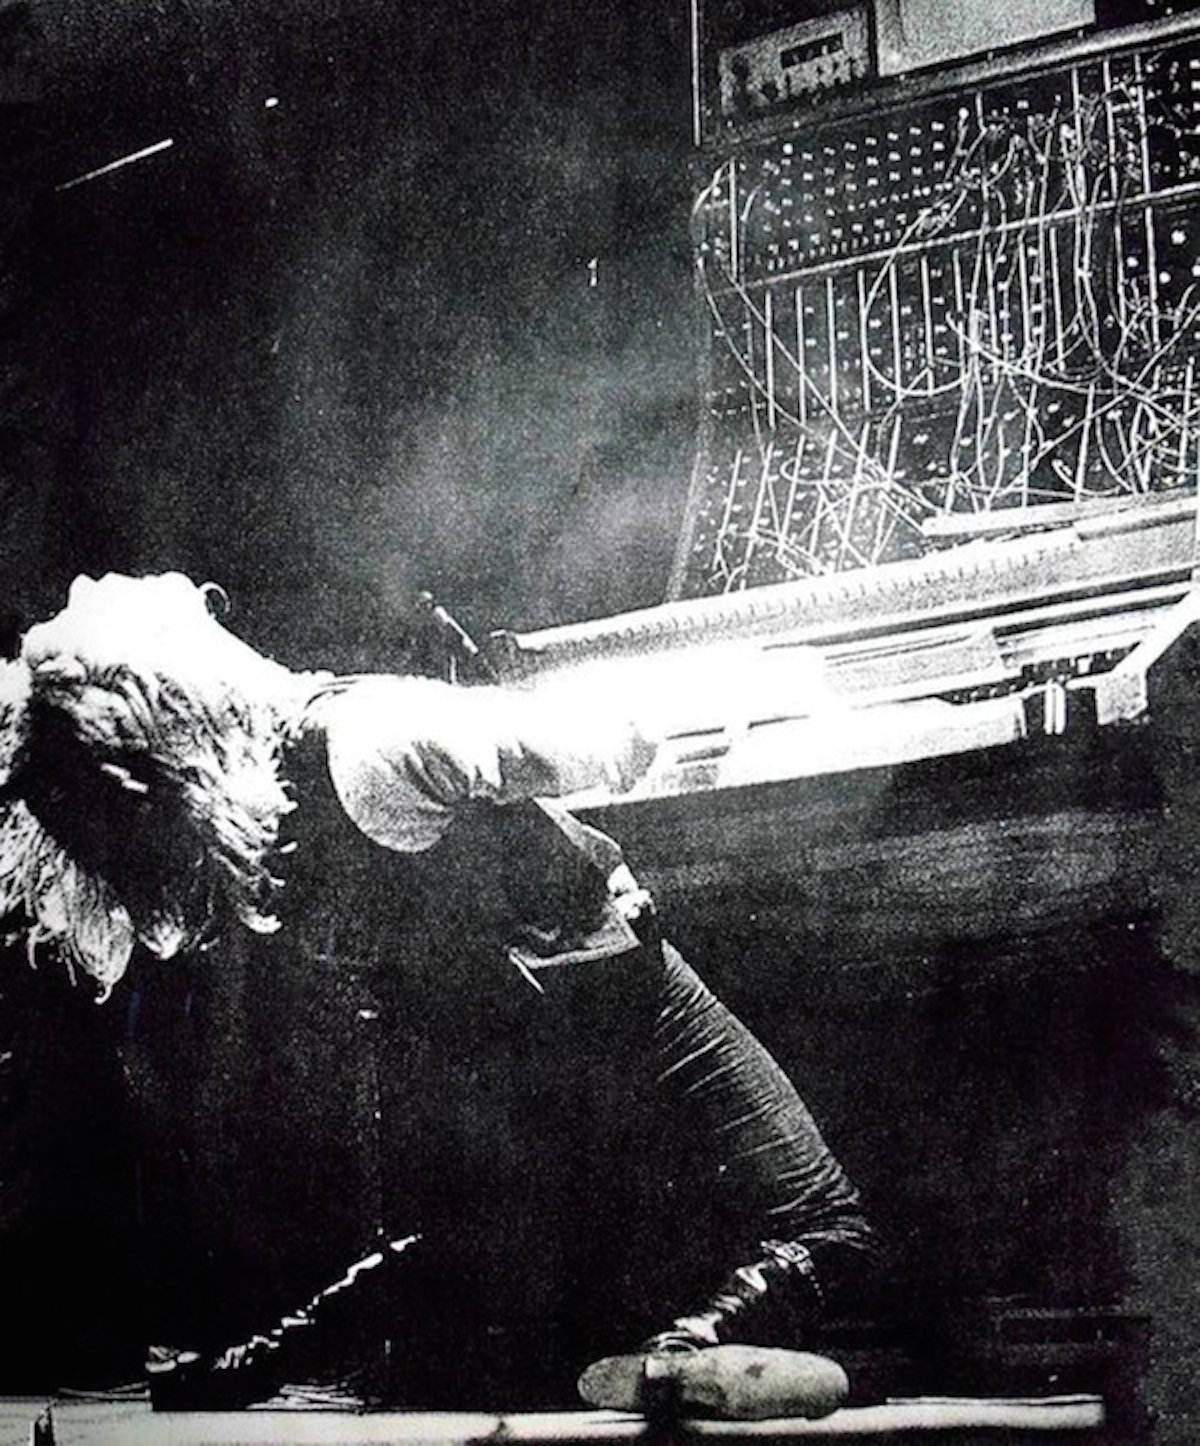  Keith Emerson performing live on his Moog modular synthesizer